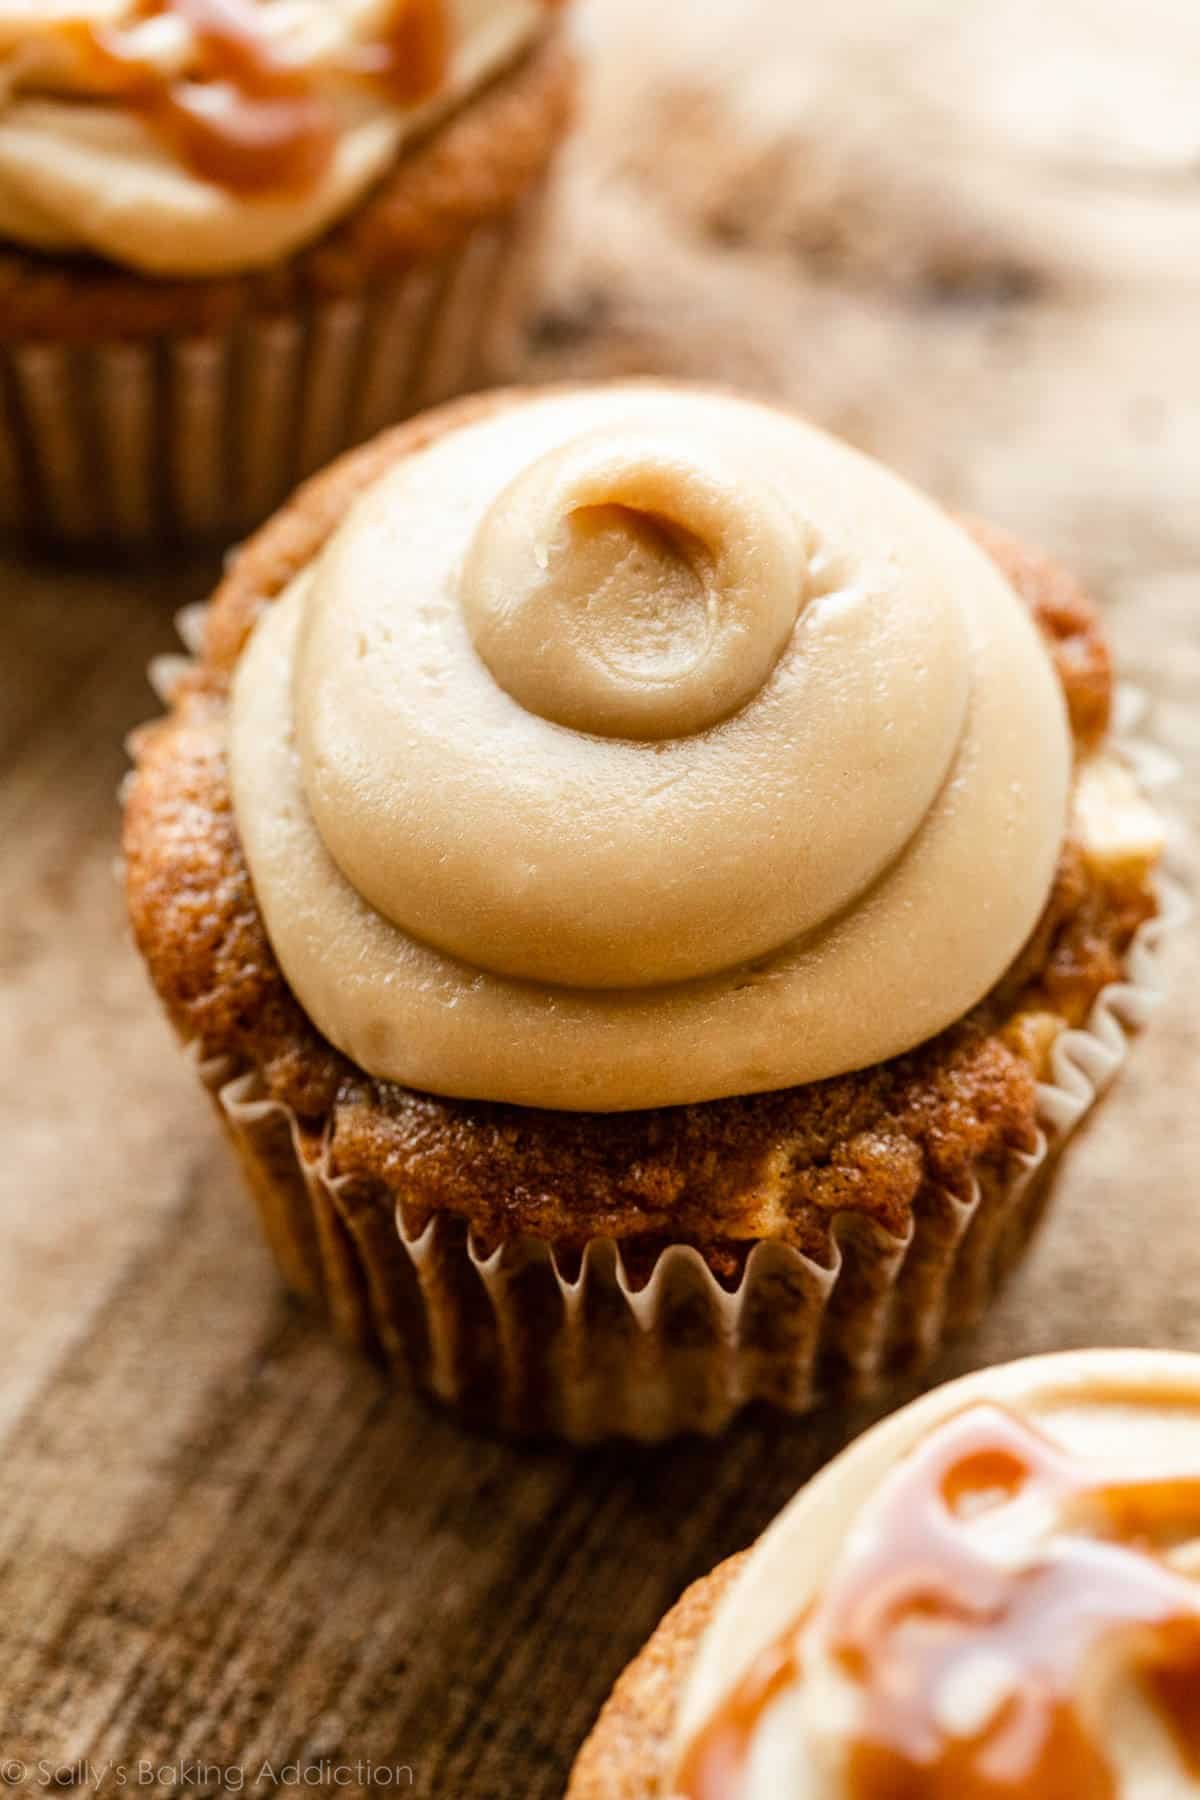 cupcake with piped salted caramel frosting on top.